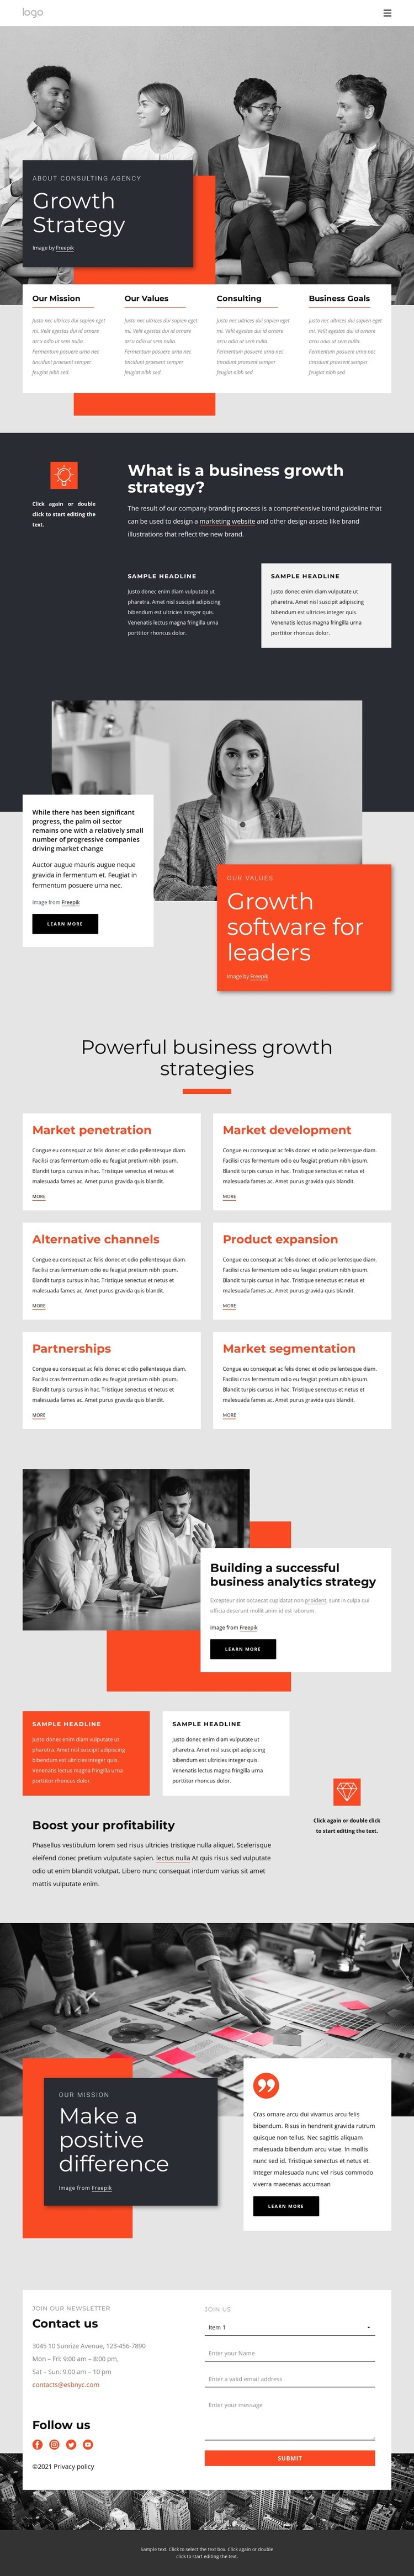 Growth strategy consultants CSS Template